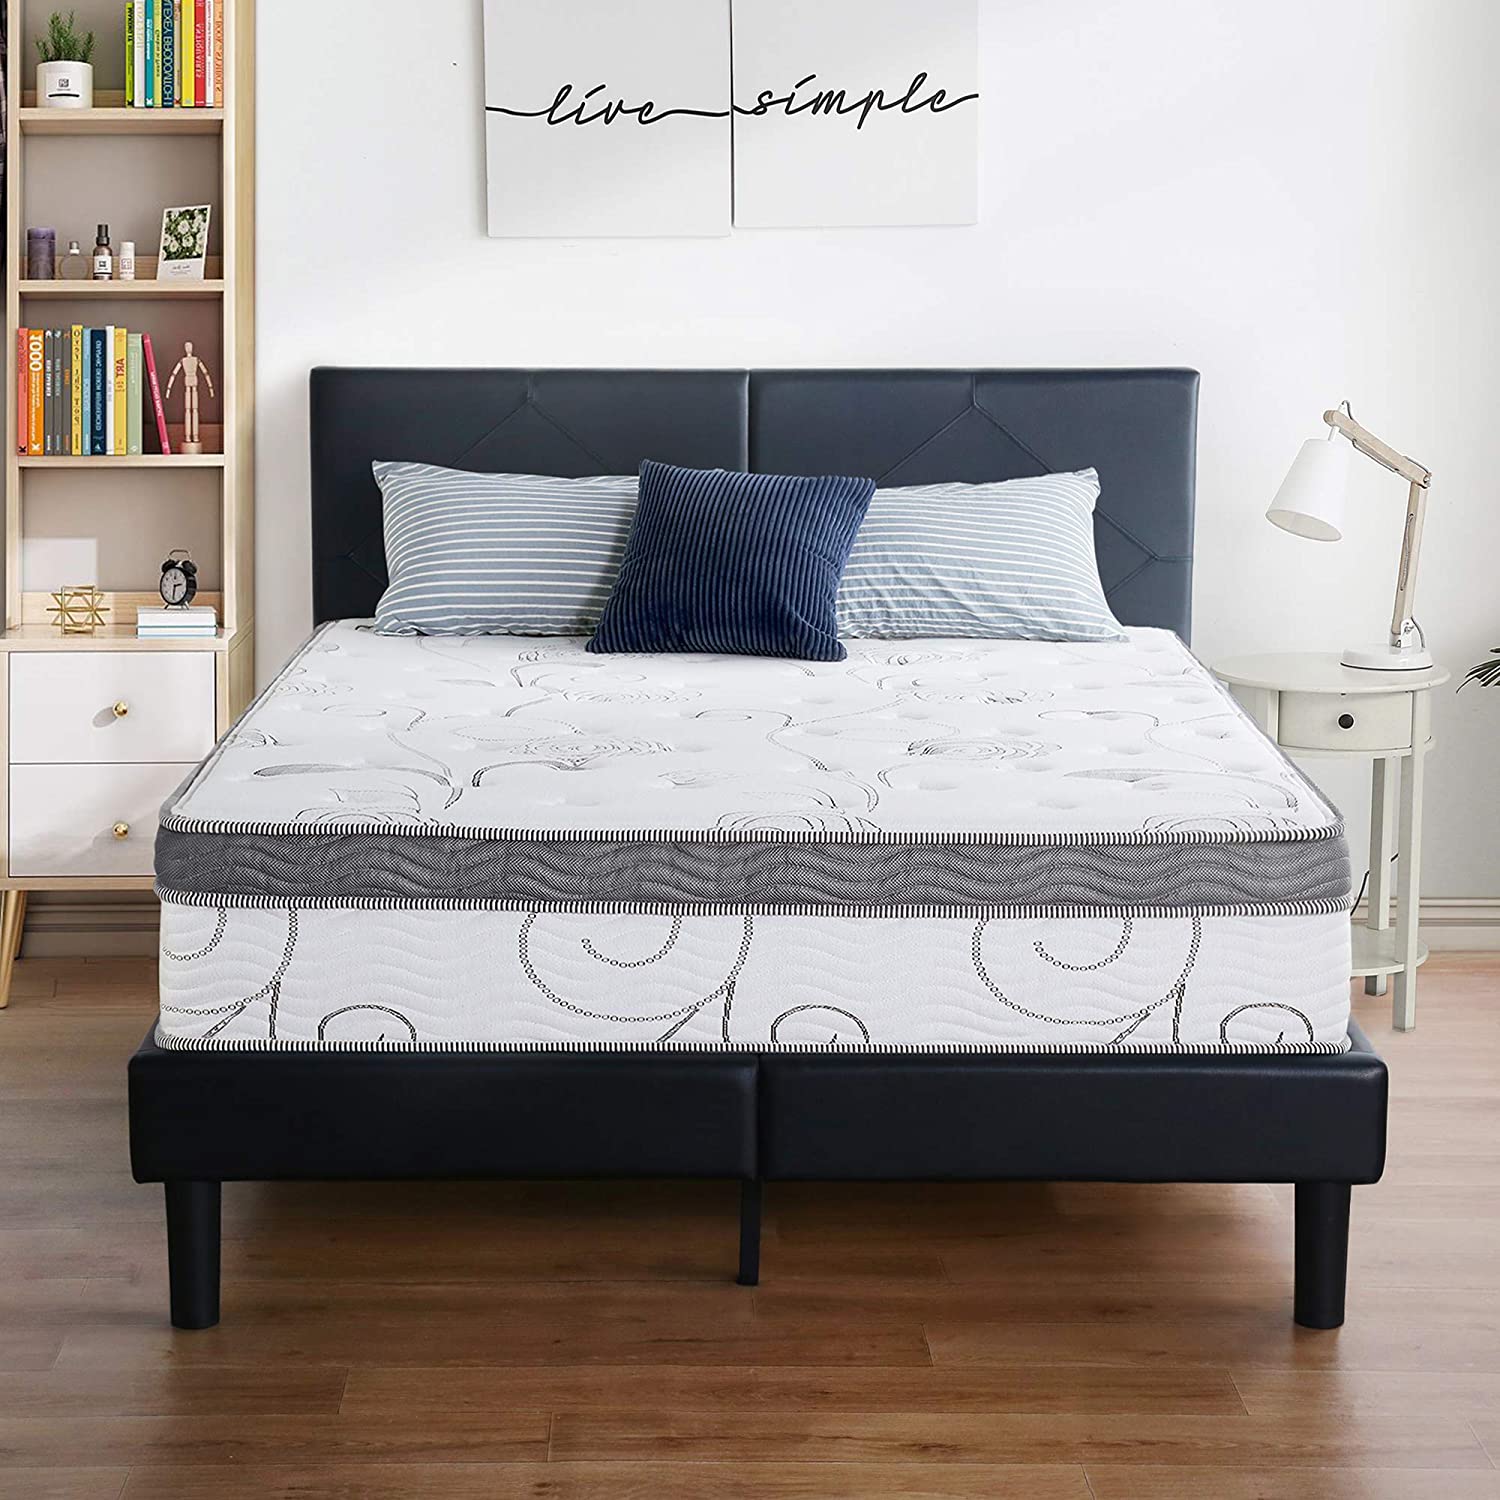 Top 10 Best Pocket Spring Mattress Review & Buying Guide